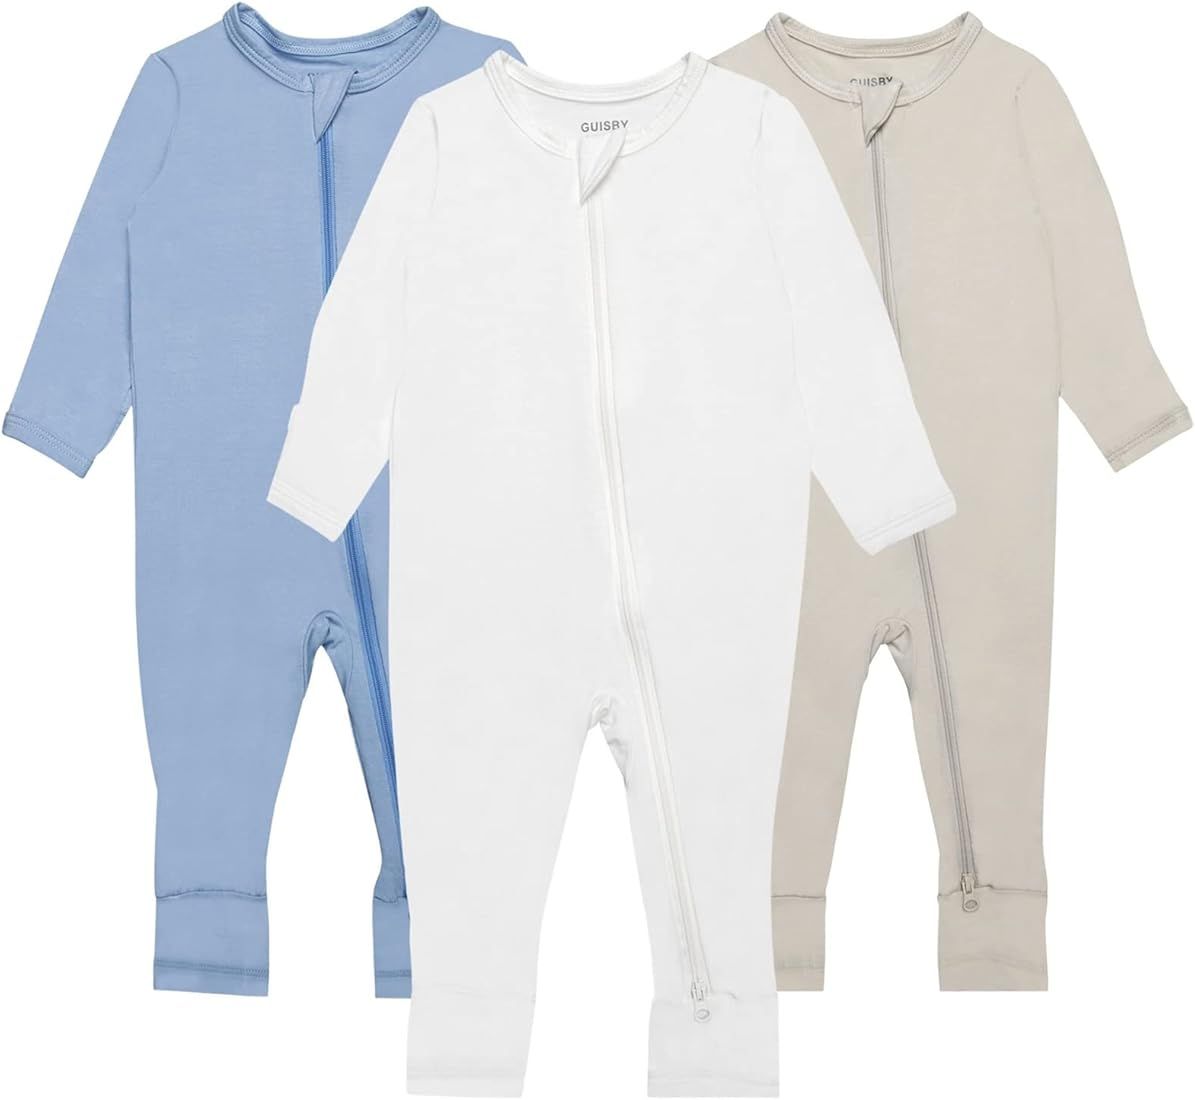 GUISBY Bamboo Baby Footless Pajamas with Mittens, 3Pcs Girls Boys Long Sleeve Snug Fits Sleepers | Amazon (US)